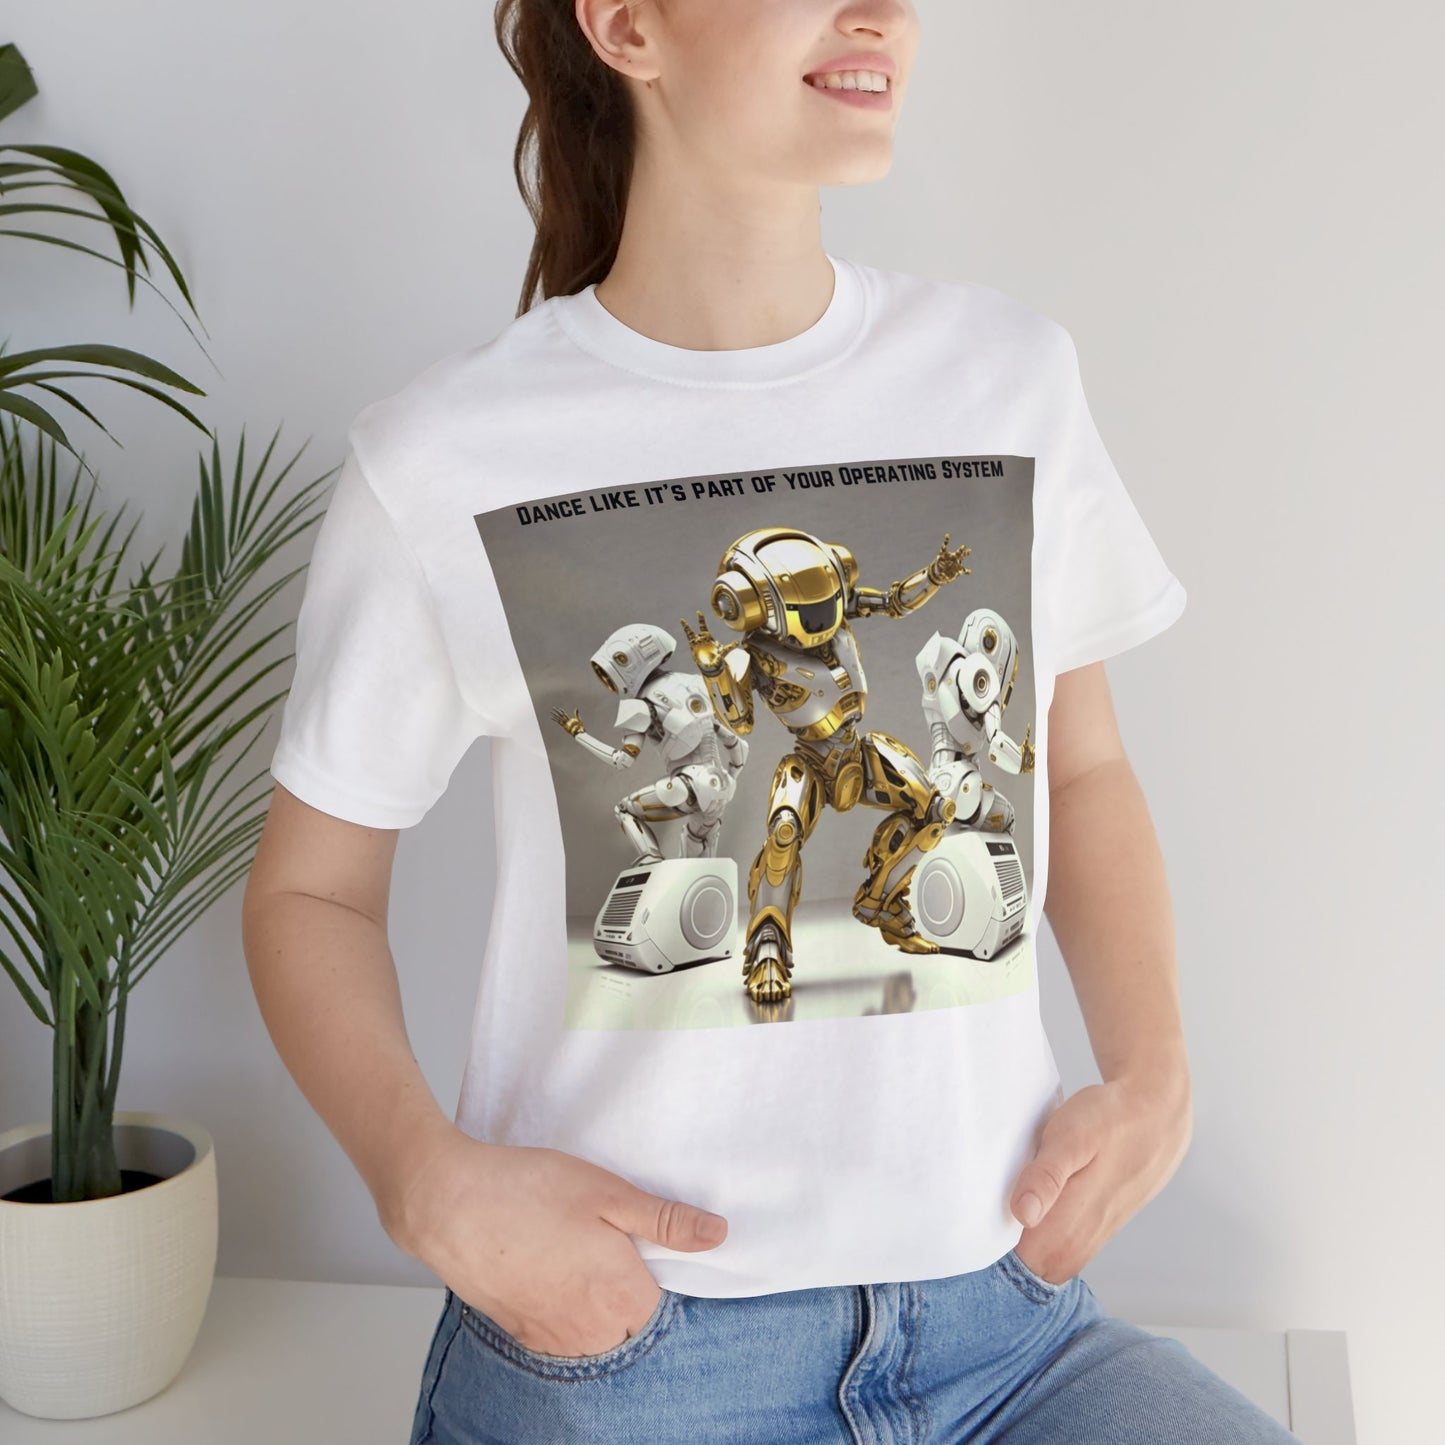 Dancing Robot | Tee | Party Gift | Rave | Techno | House Music | Hip Hop | Fun | Unisex | Men's | Women's | HD Graphics | All Ages | Cool | T-Shirt